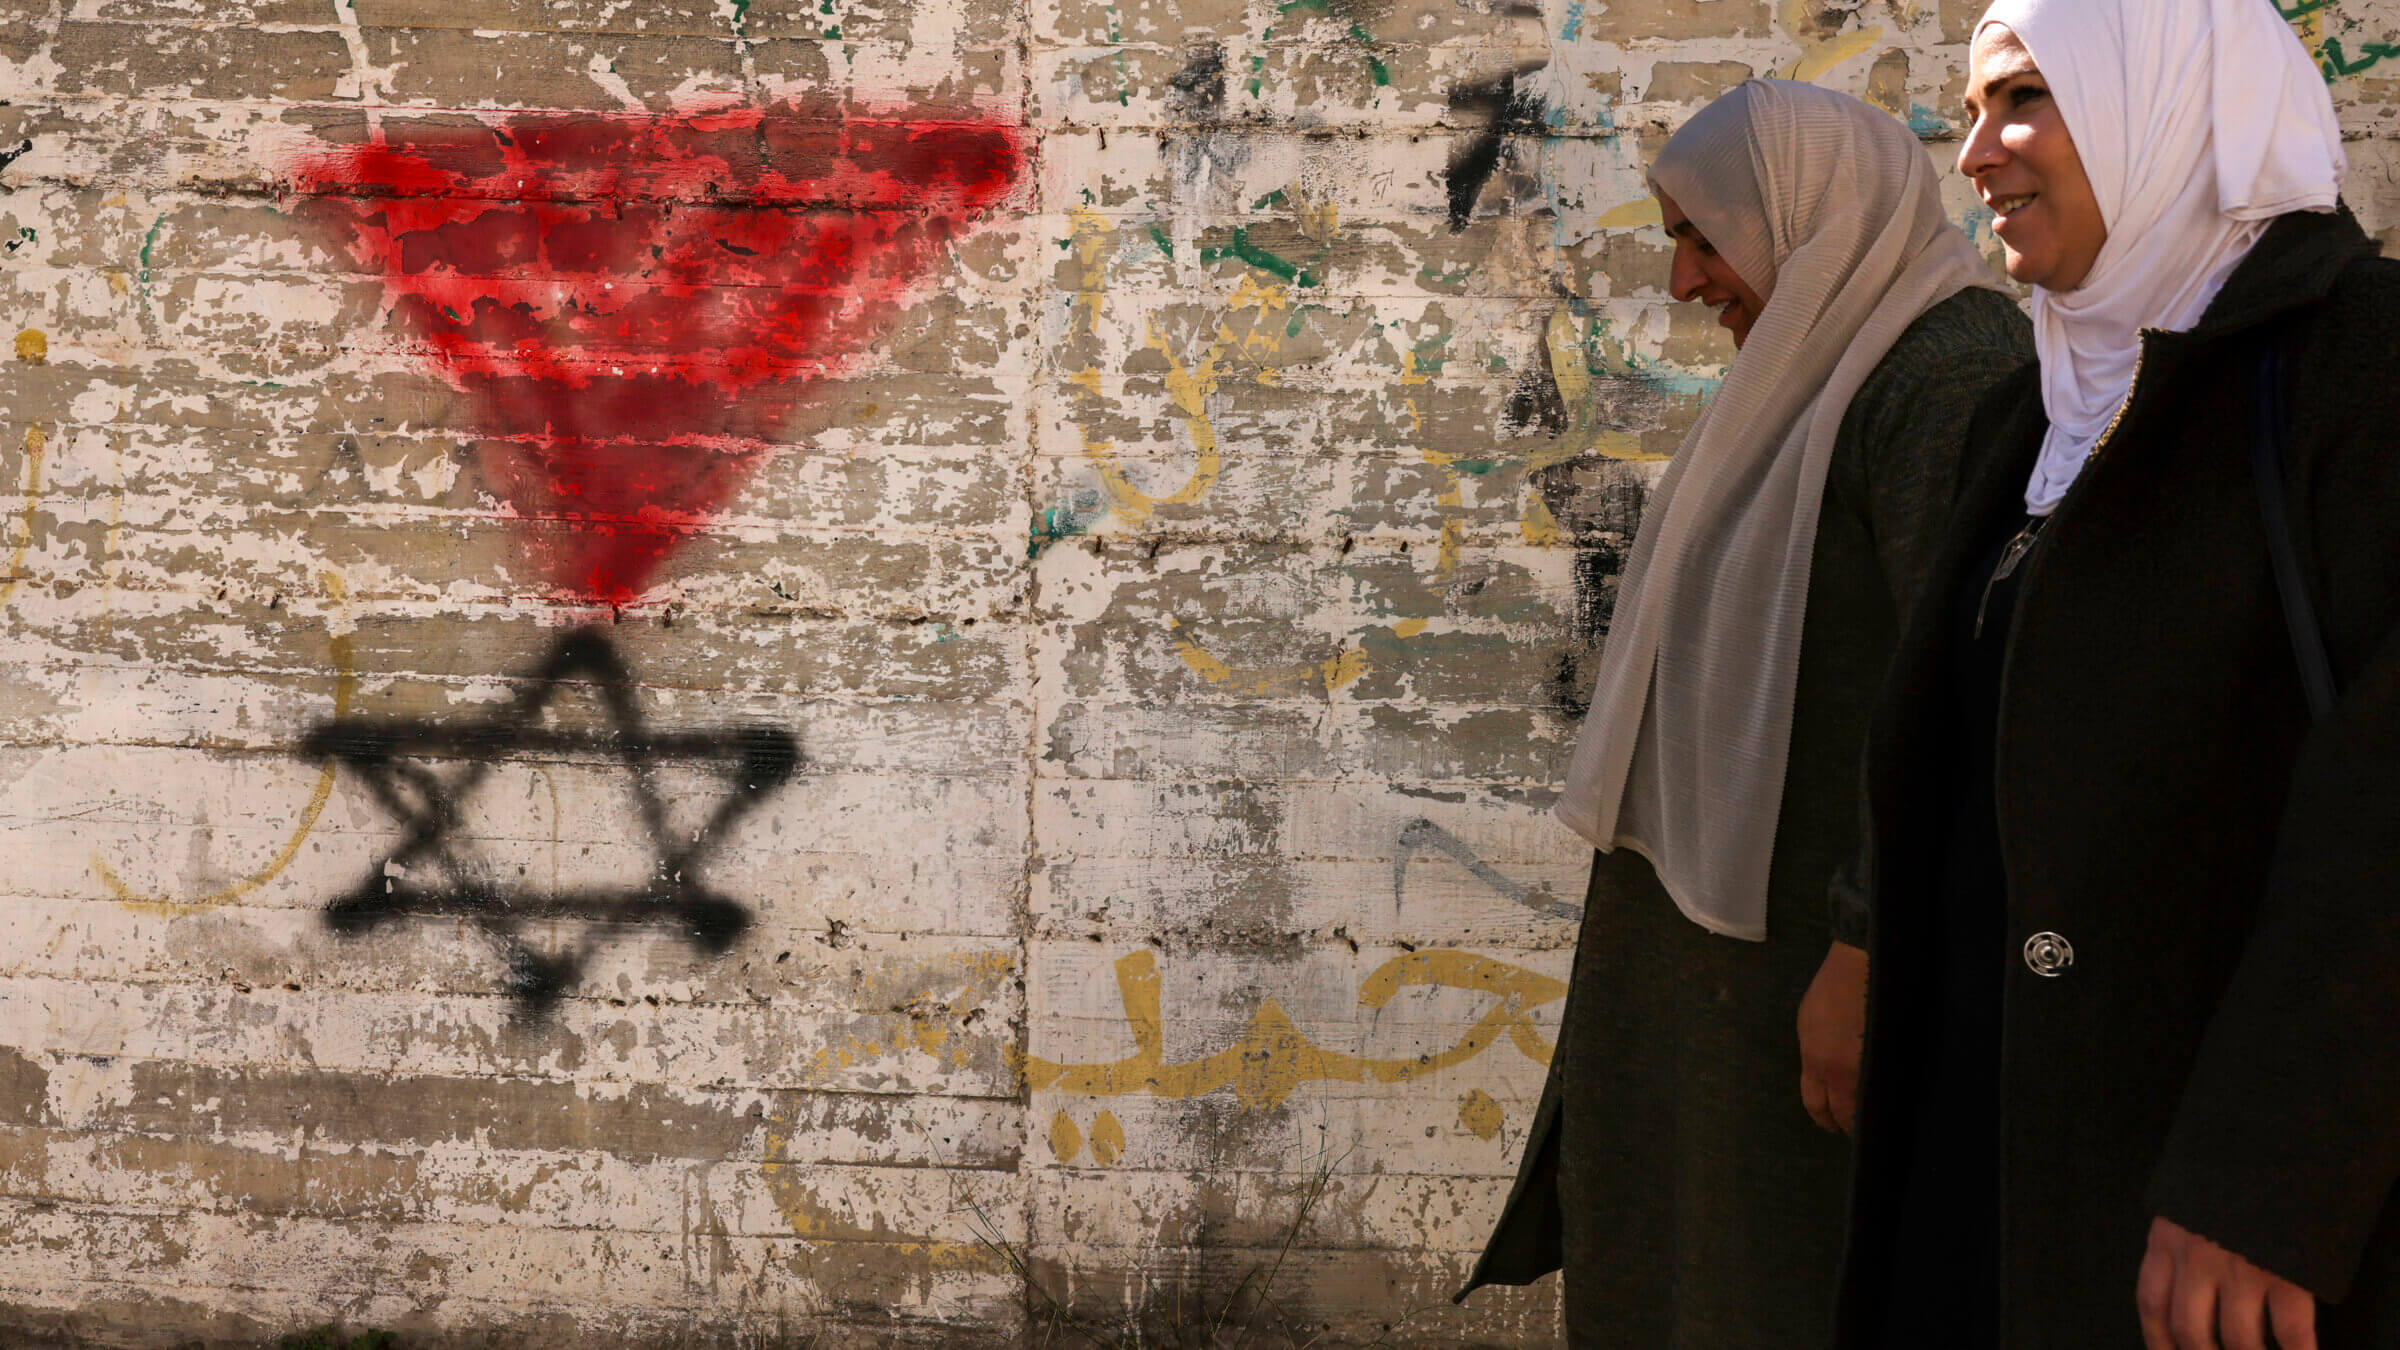 Palestinian women walk past a graffiti of the Star of David under an inverted "red triangle," a symbol that Hamas'  military wing, the Qassam Brigades, uses to identify Israeli targets in their videos, in the occupied West Bank city of Hebron on Nov. 30, 2023.